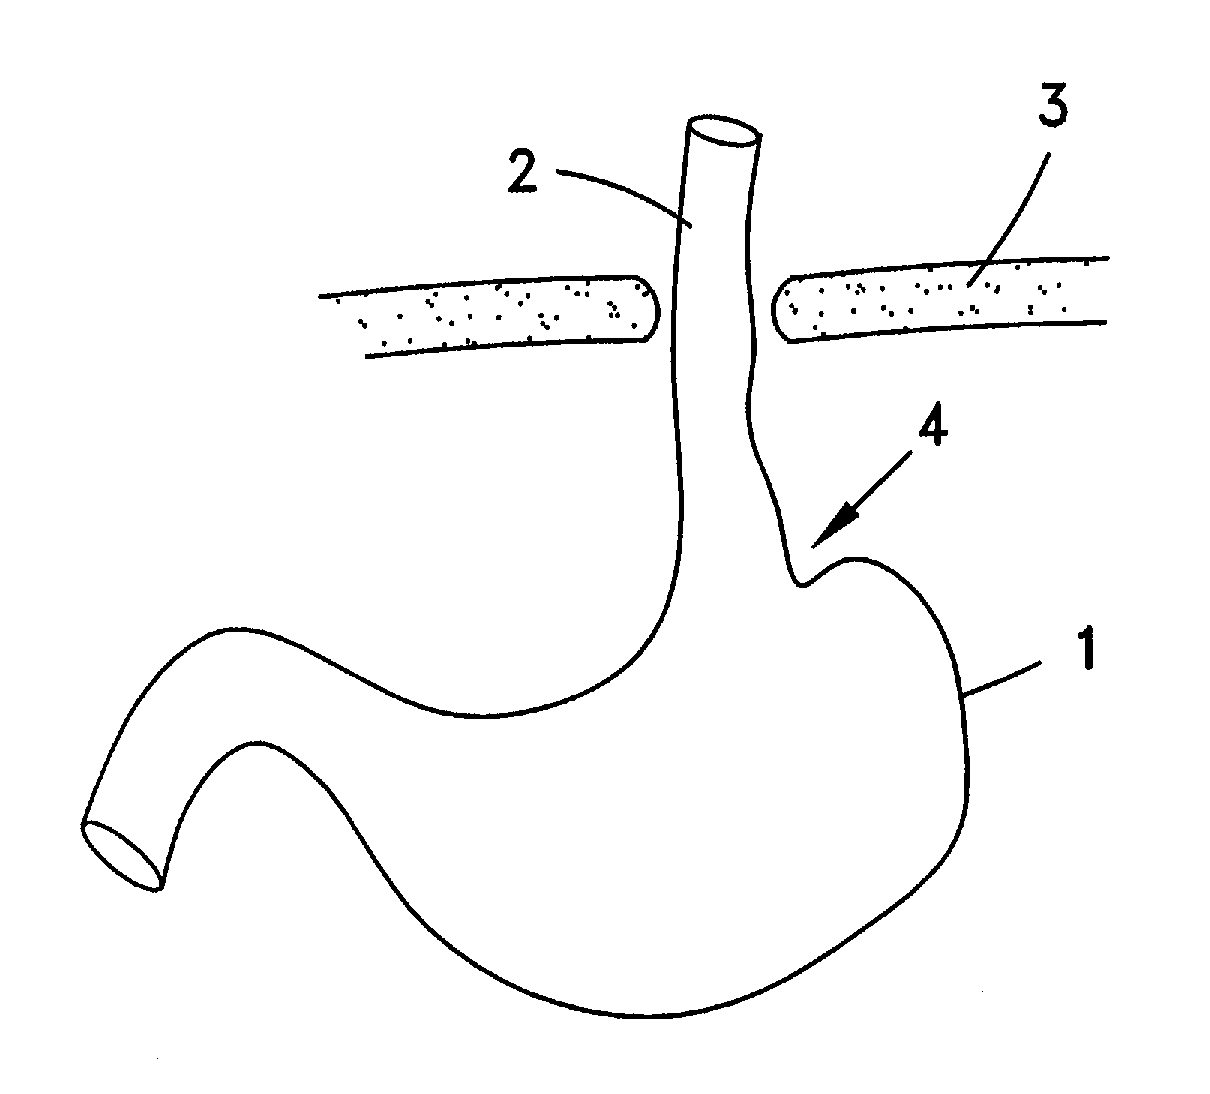 Method of performing surgical procedures on patients suffering from hiatal hernia